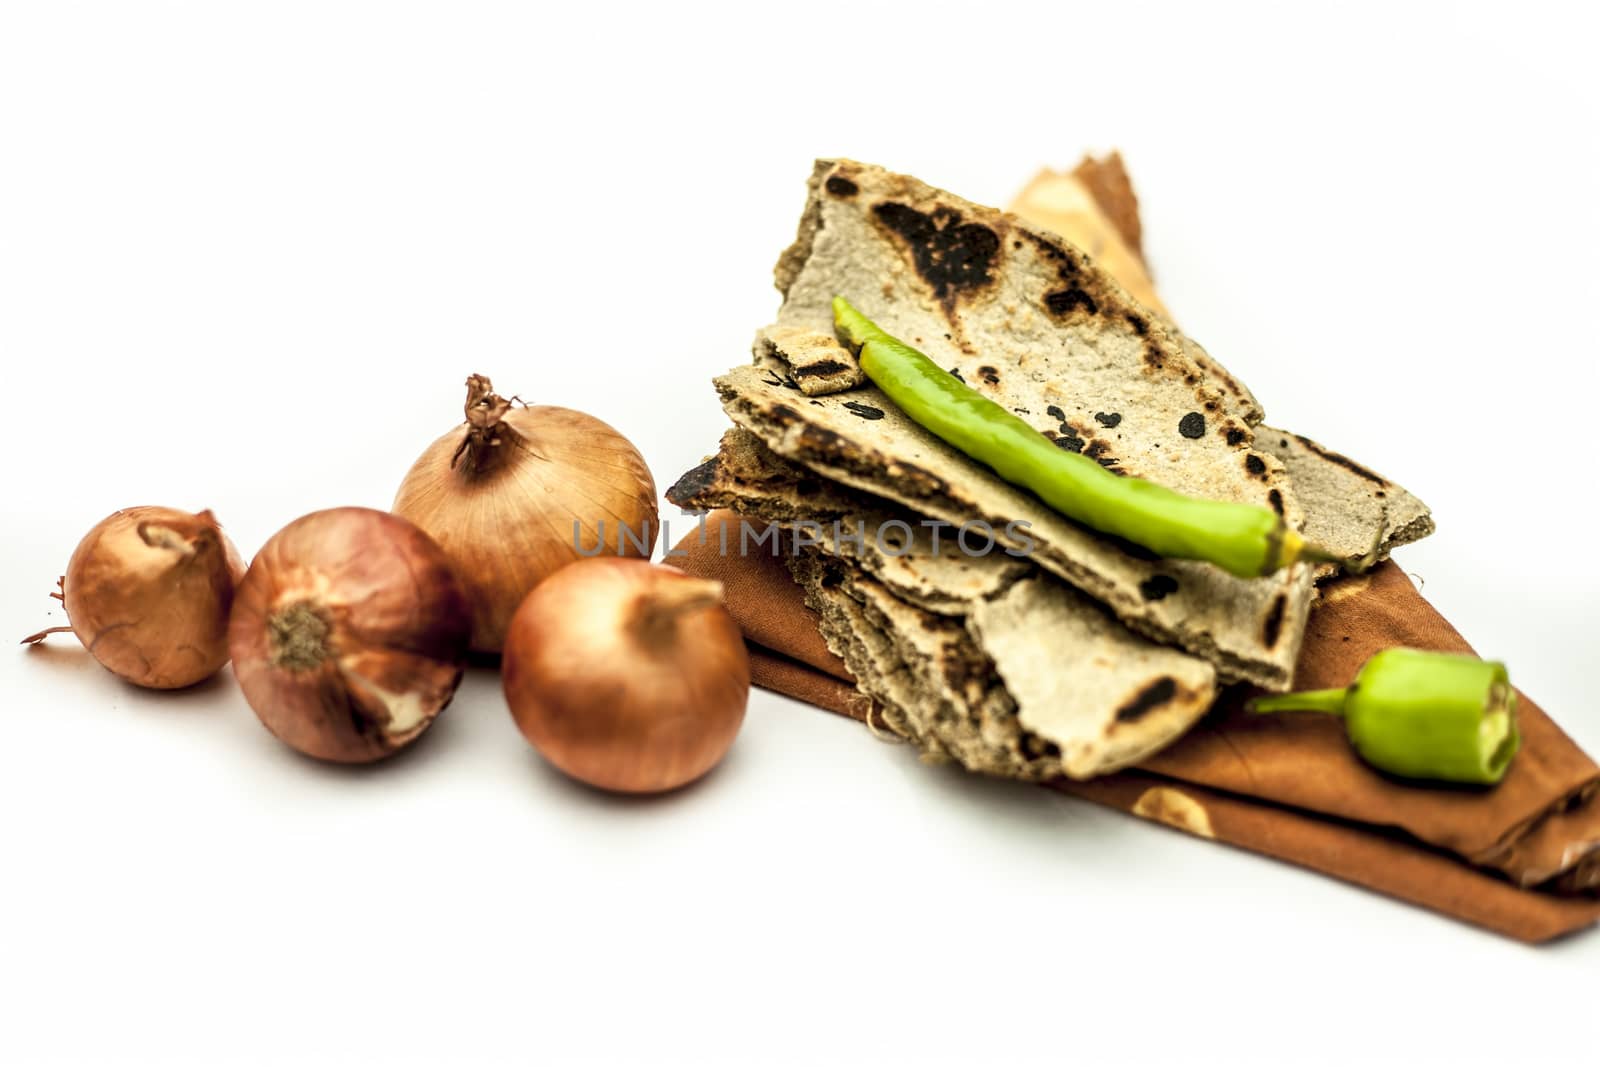 Poor man's lunch or farmer's lunch isolated on white or common items eaten in lunch isolated on white which are bajri ki roti with cut and raw onion along with green chili.